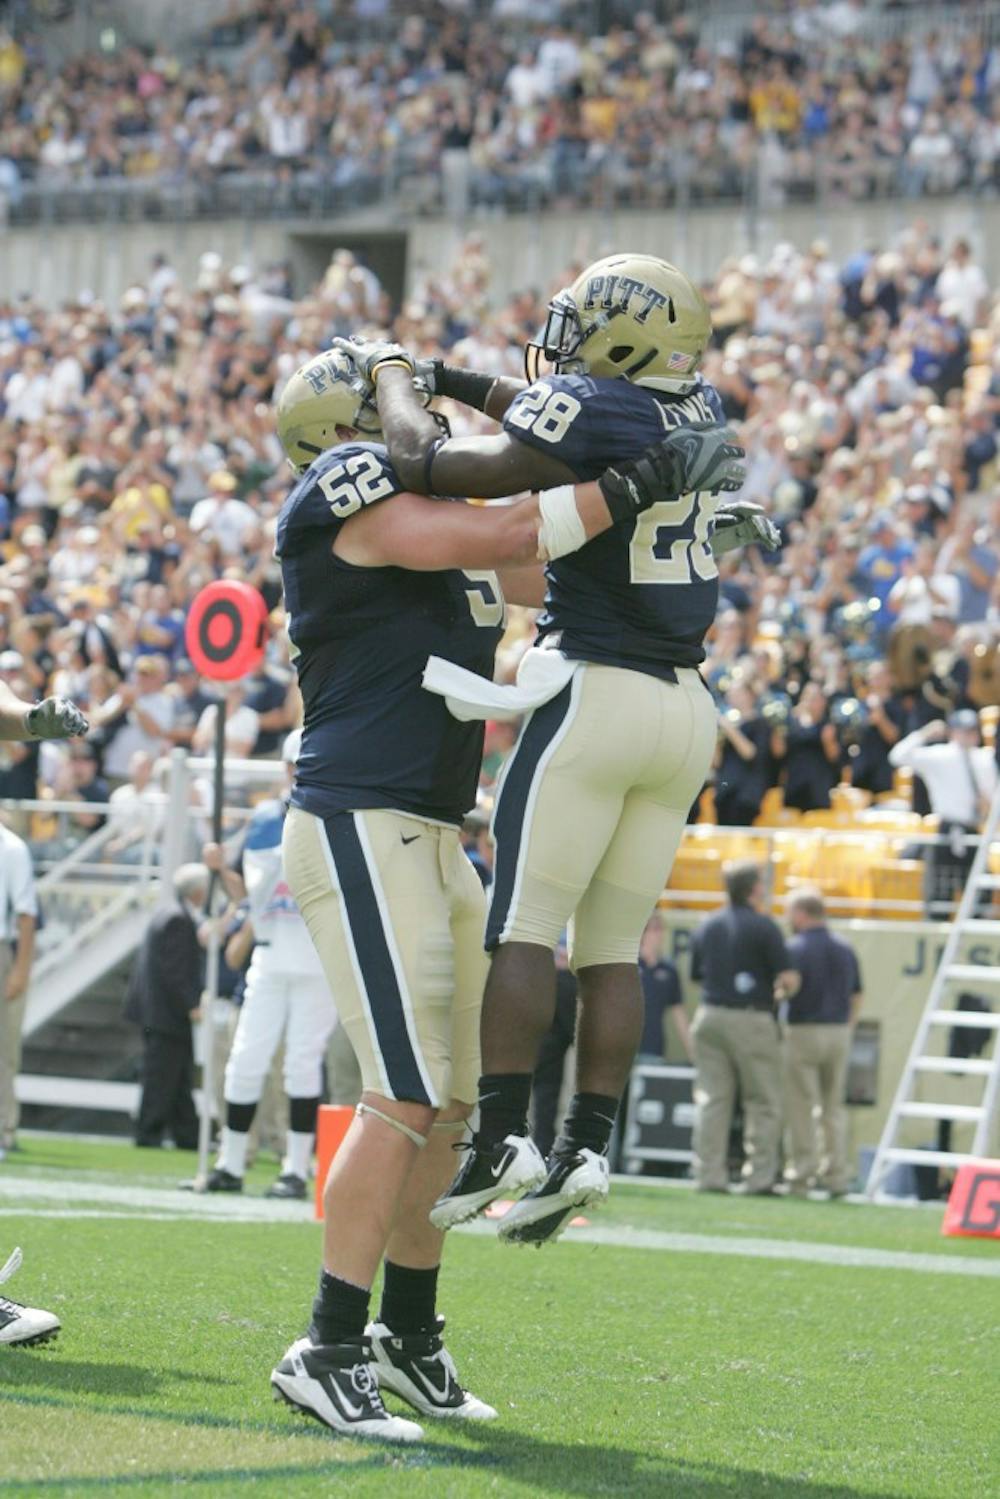 PITTSBURGH - SEPTEMBER 11:  Dion Lewis #28 of Pittsburgh Panthers celebrates his touchdown with teammate Lucas Nix #52 against the New Hampshire Wildcats at Heinz Field on September 11, 2010 in Pittsburgh, Pennsylvania. Pittsburgh defeated New Hampshire 38-16.  (Photo by Charles LeClaire/Getty Images)